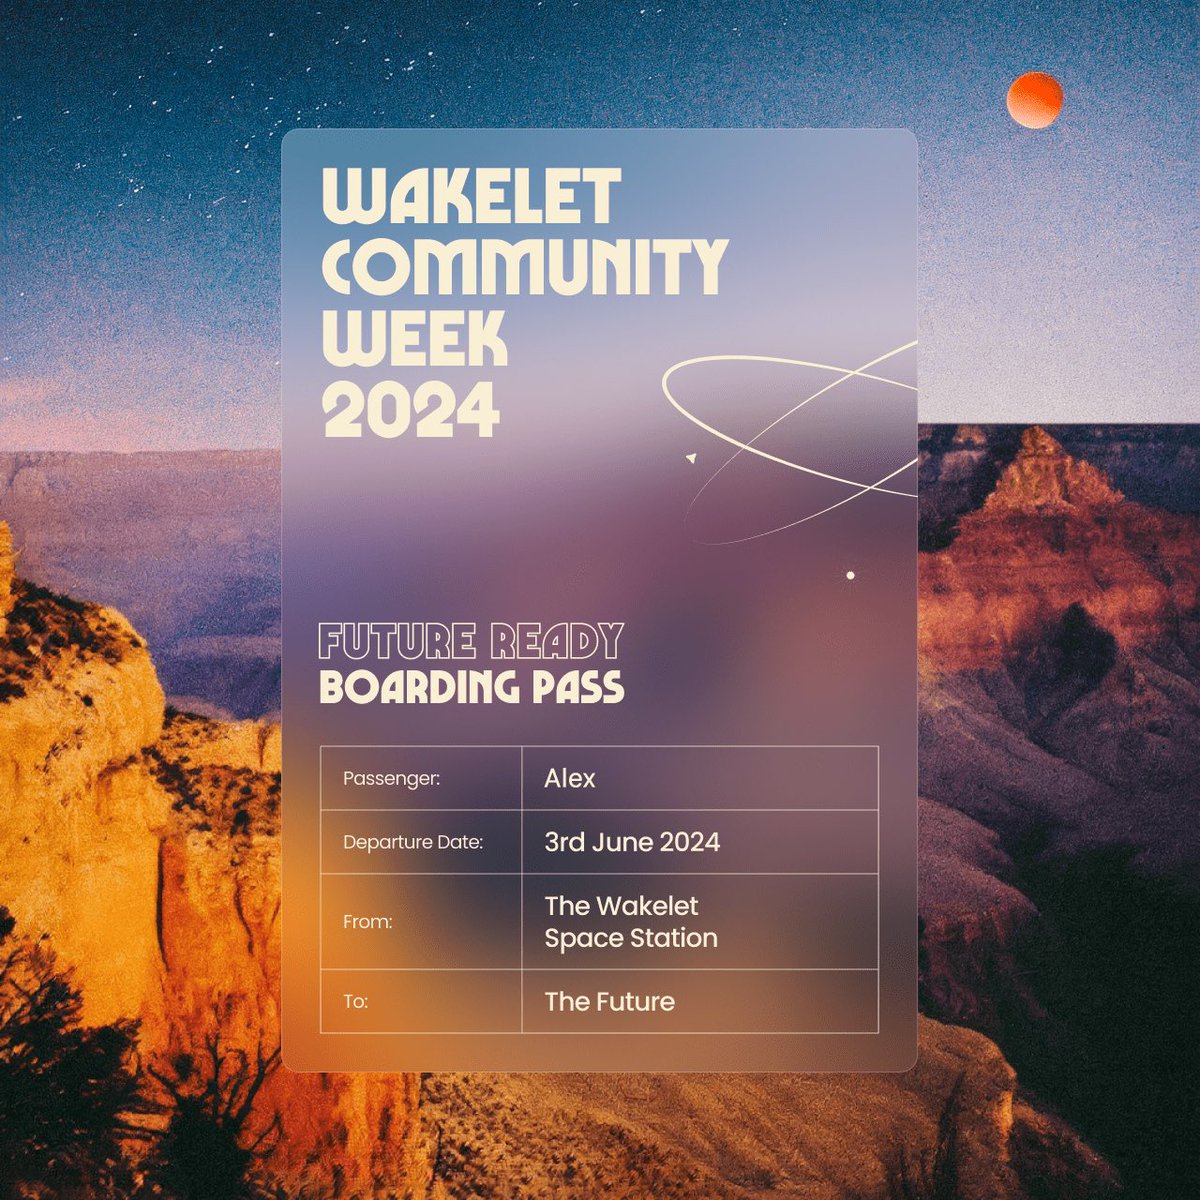 I have my boarding pass for @wakelet Community Week! Get yours at community.wakelet.com/cw24